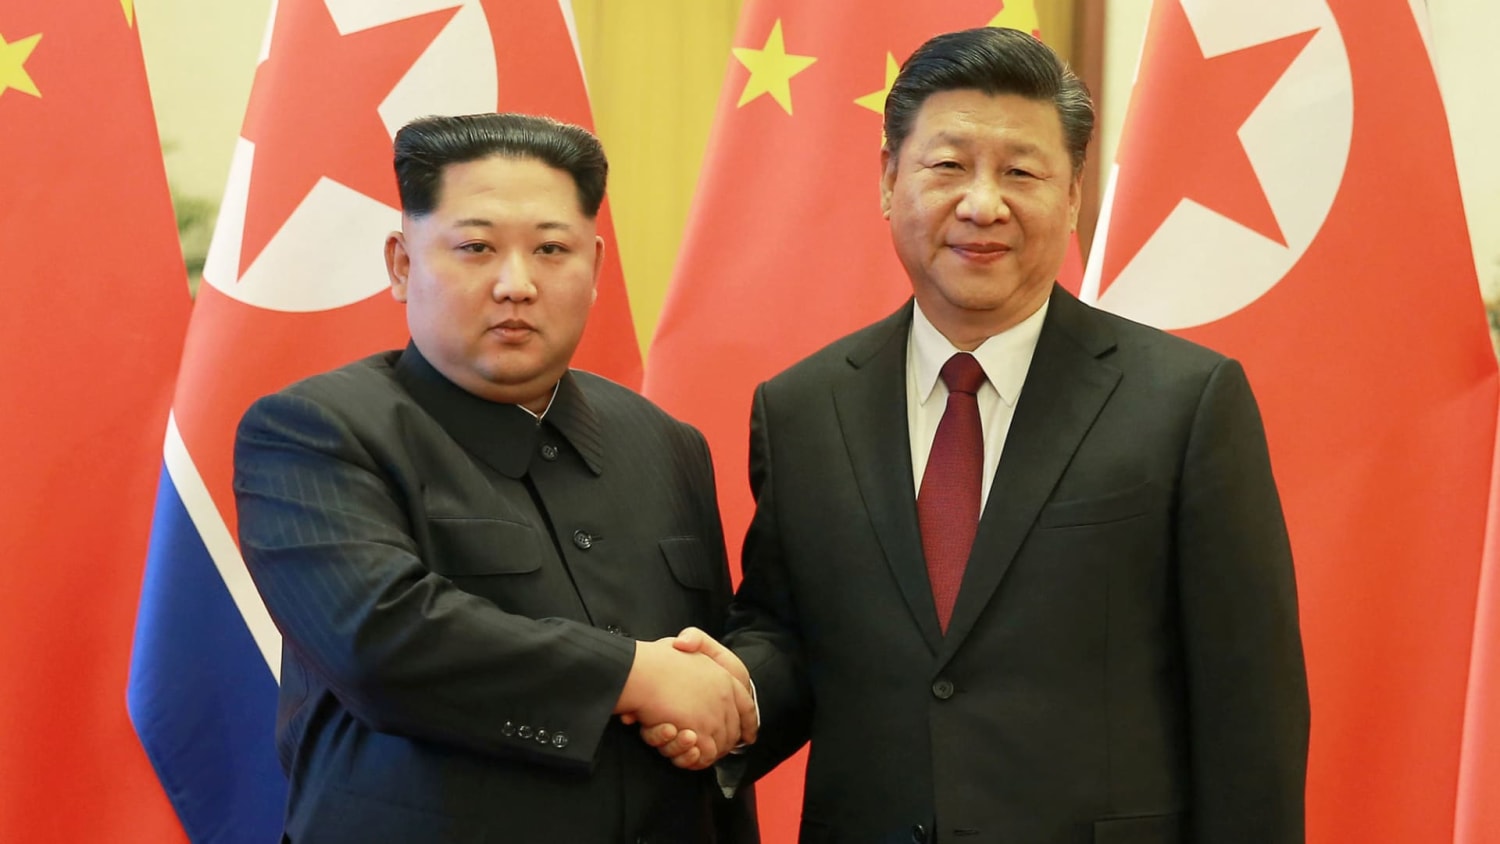 North Korea's Kim appears to have a big goal: Winning Belt and Road investments from Beijing